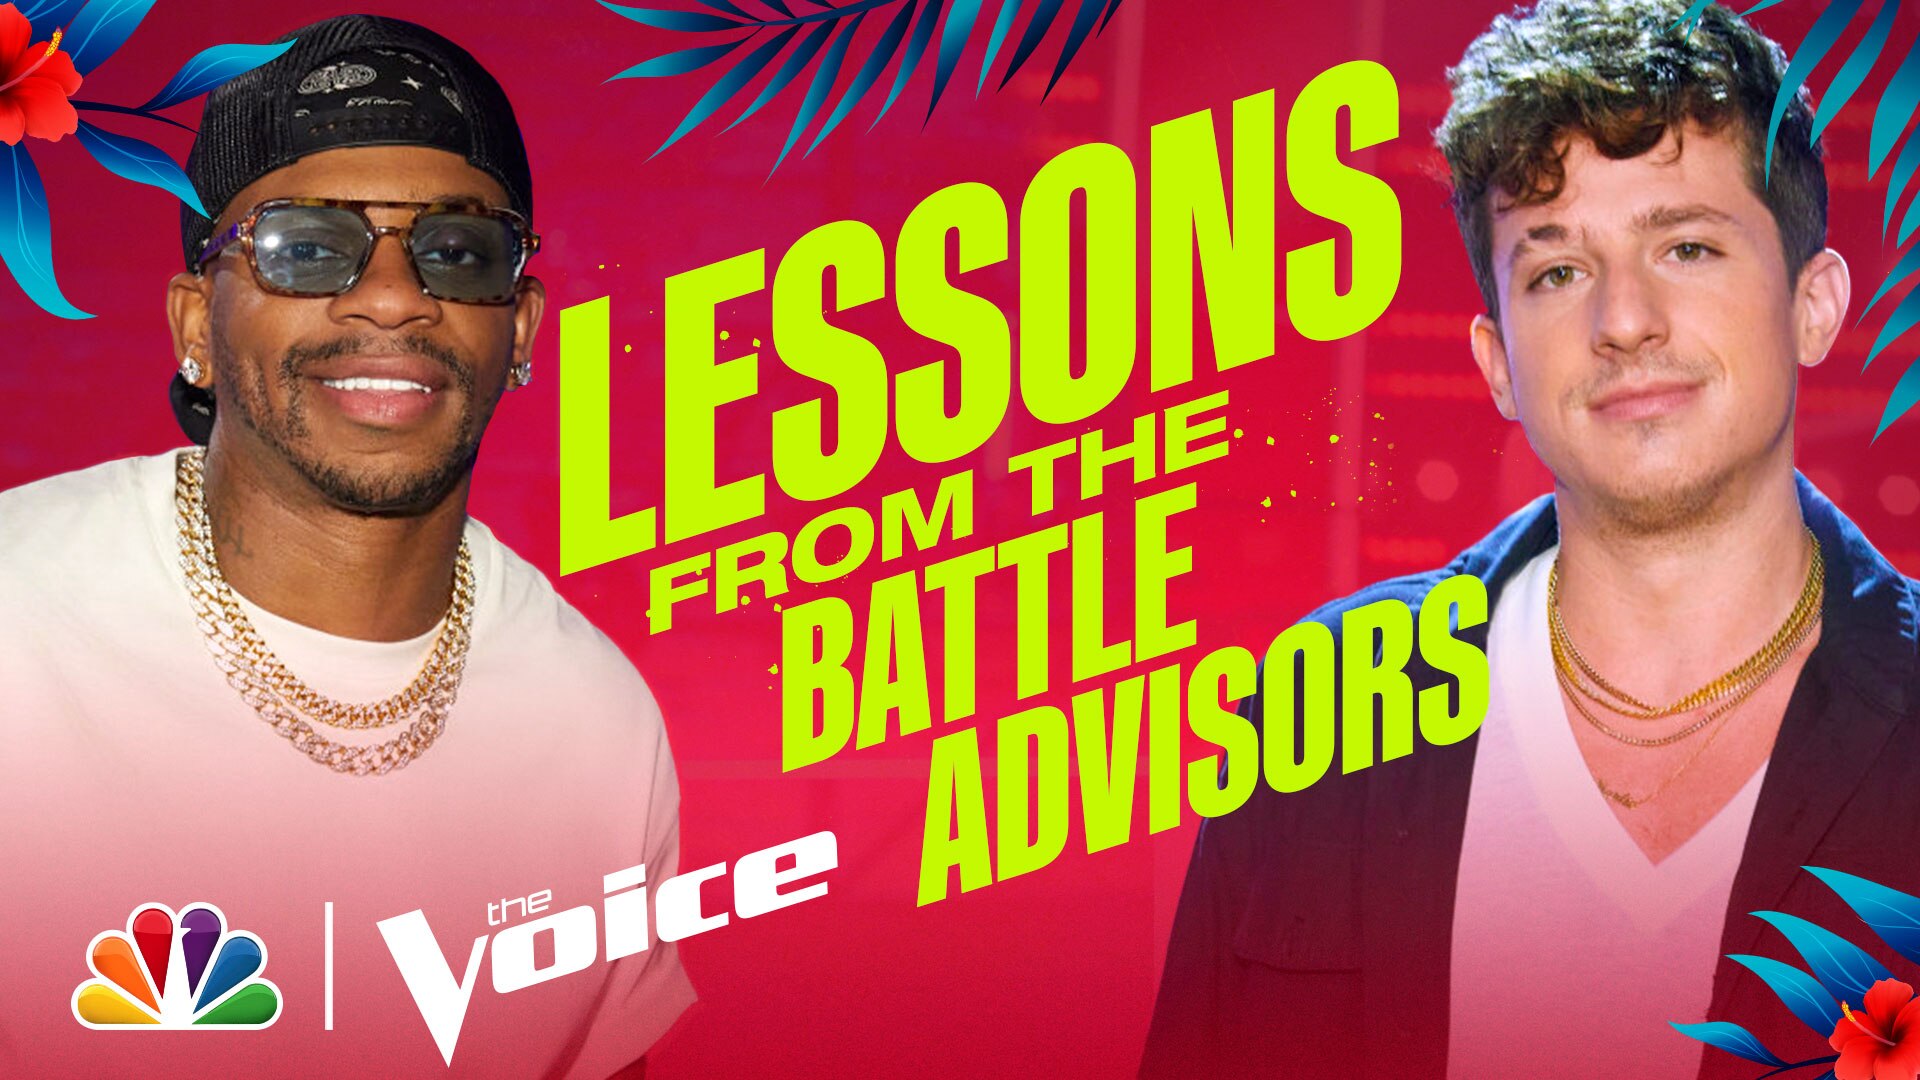 Watch The Voice Highlight Battle Advisors Teach You Something